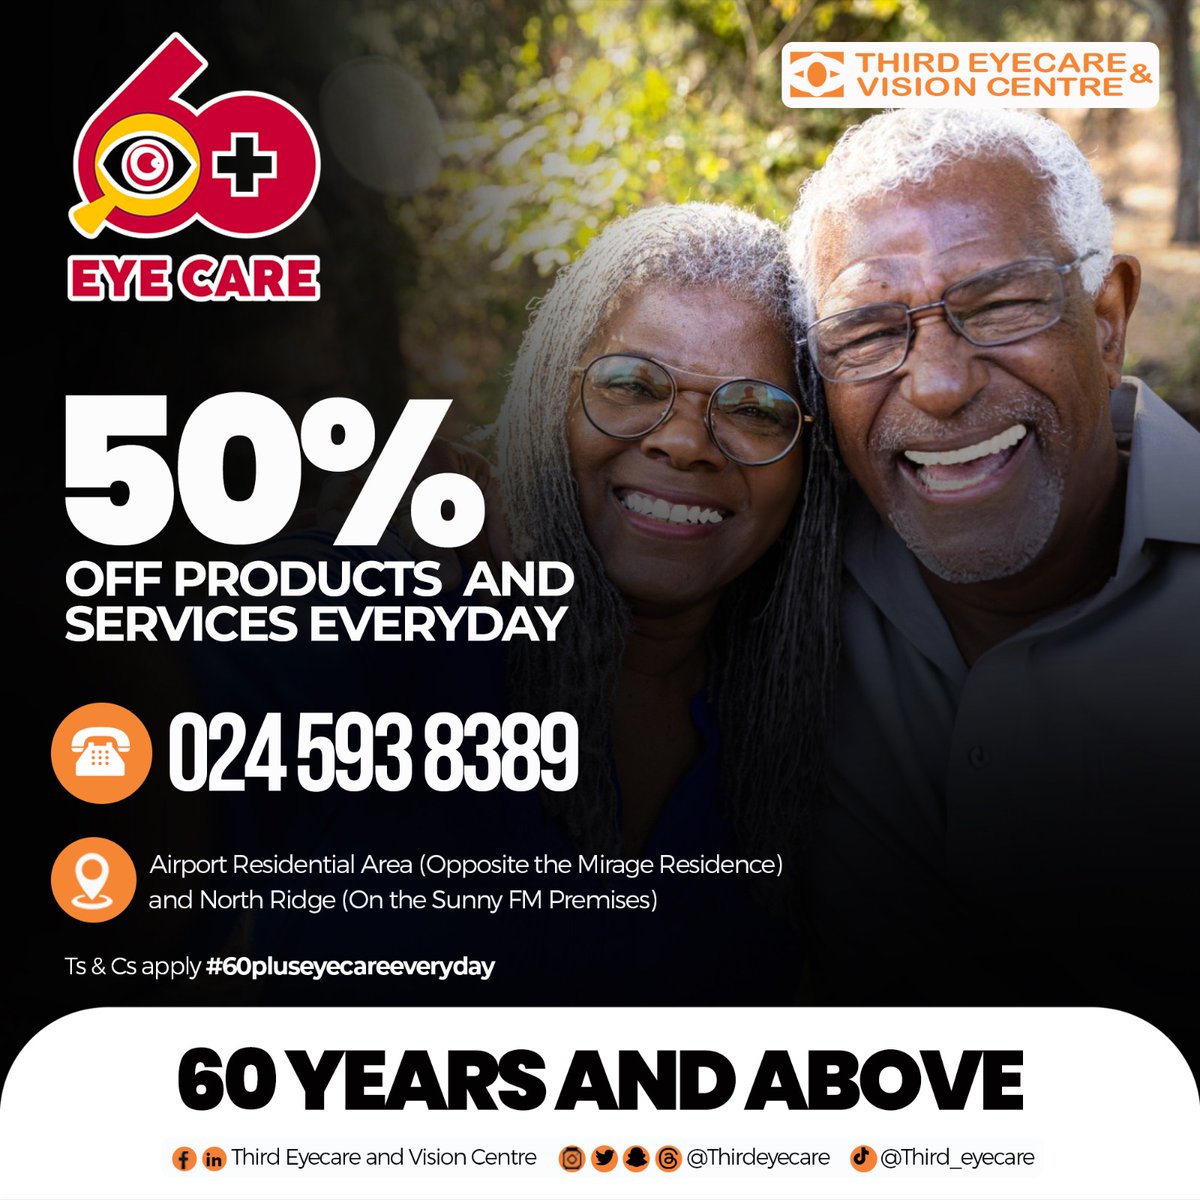 60 PLUS EYE CARE is now an everyday thing!!!!!! ● 50% discount off Glasses and Services. Location: North Ridge (On the Sunny FM premises) and Airport Residential (Opposite Mirage Residence). for 60 YEARS AND ABOVE! #thirdeyecare #60pluseyecareeveryday #april2024